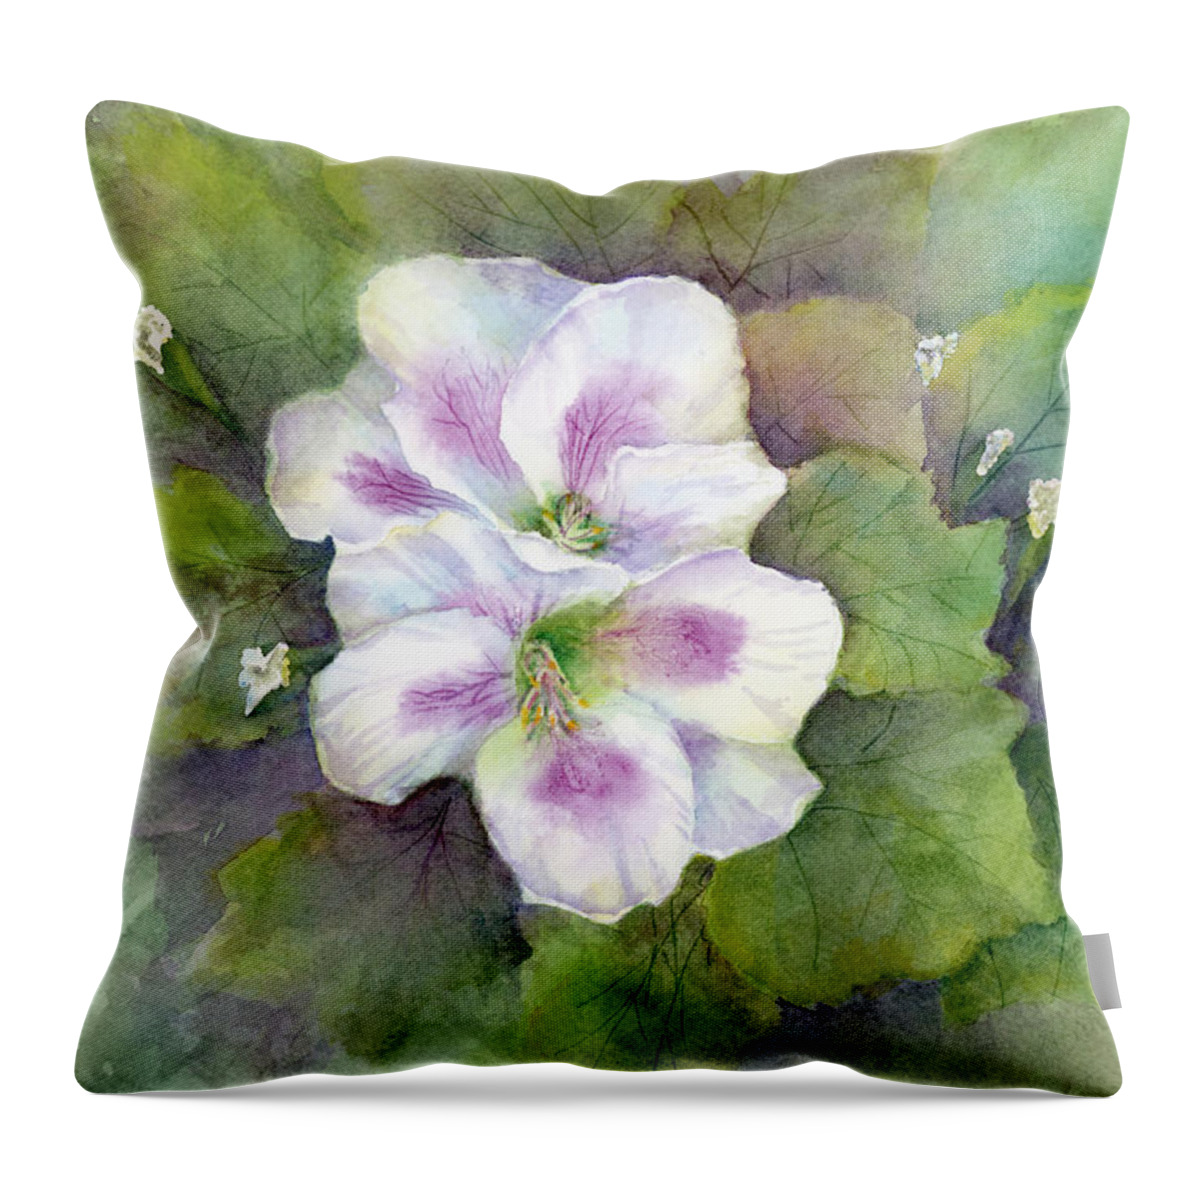 Flower Throw Pillow featuring the painting White Purple Flowers by Amy Kirkpatrick